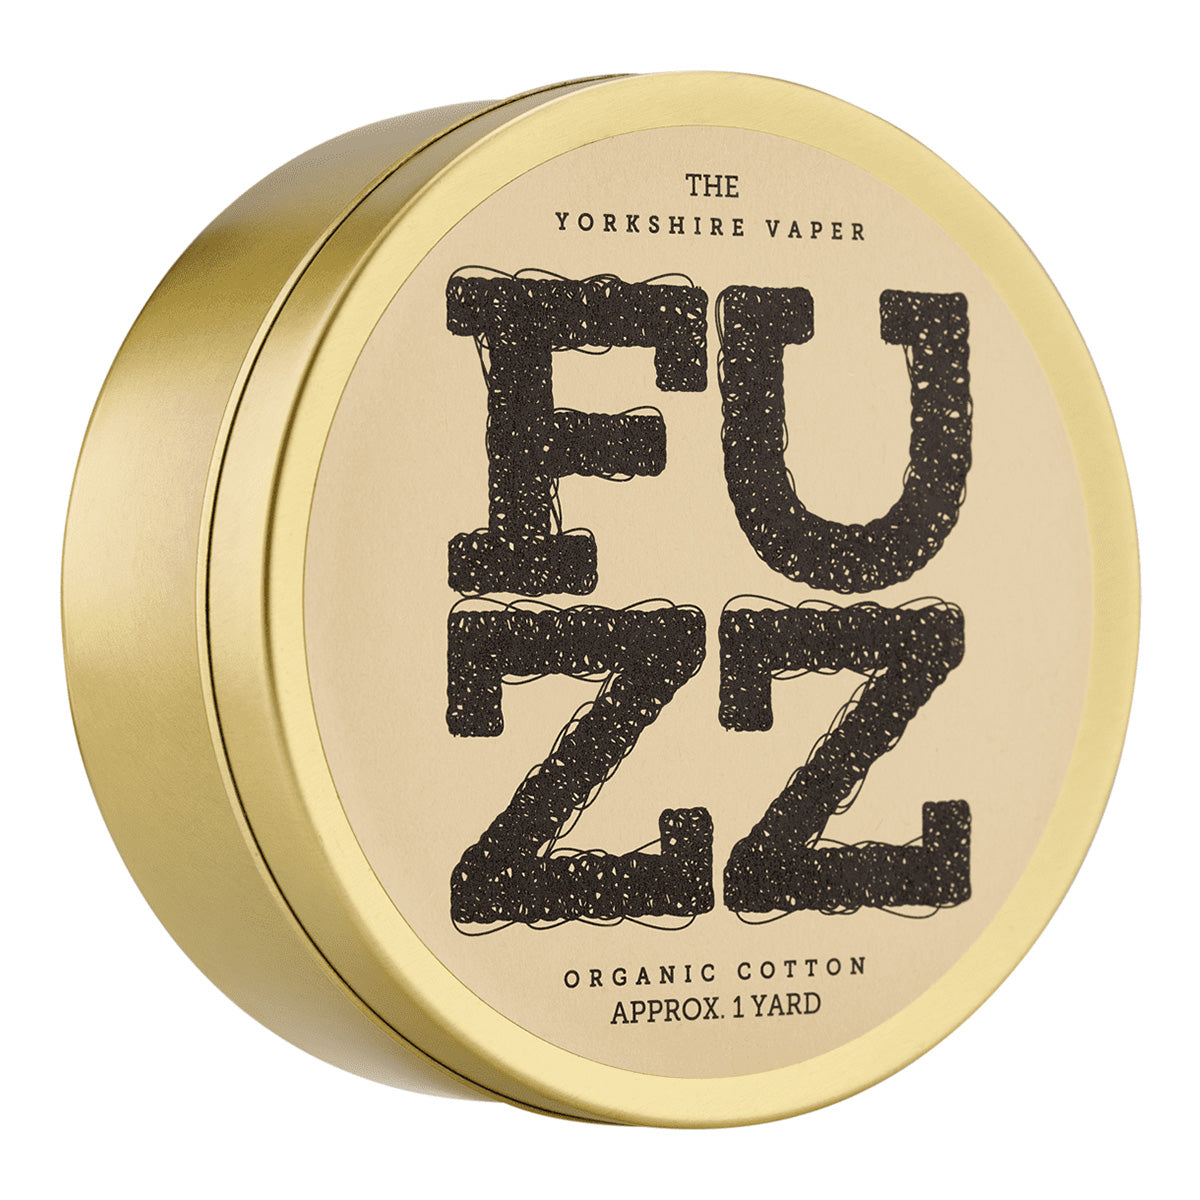 Fuzz Cotton by The Yorkshire Vaper